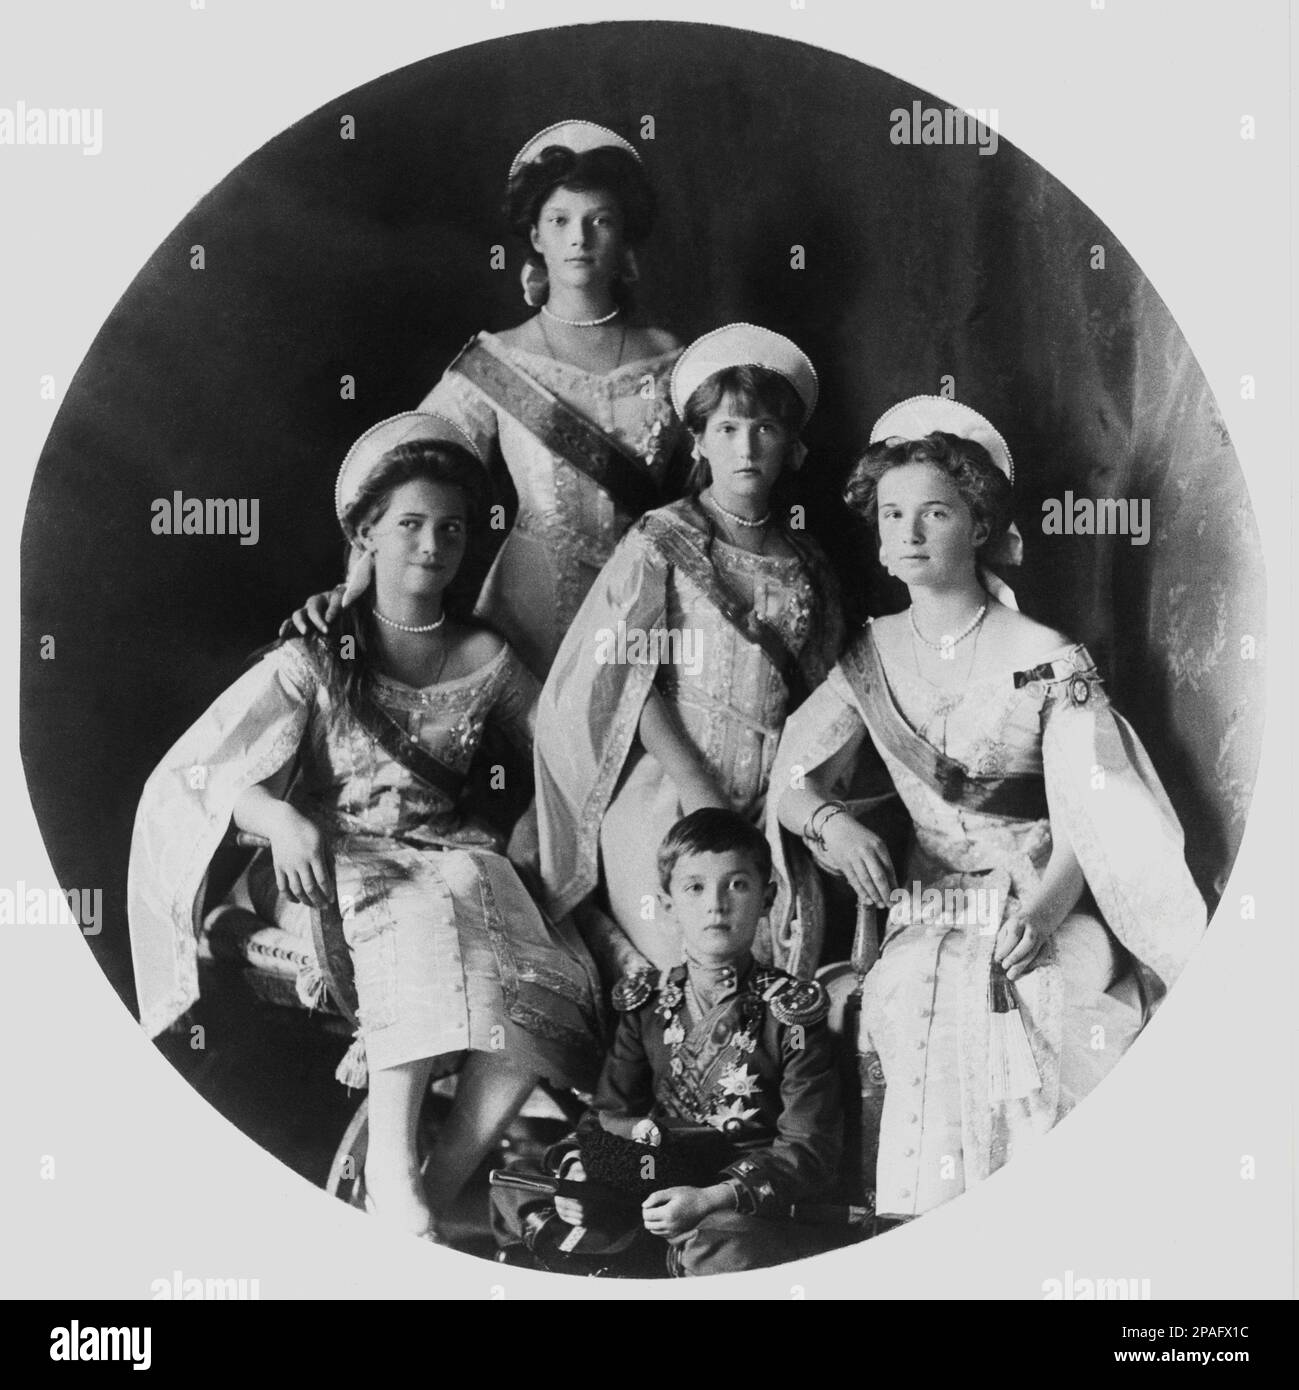 1911 : The russian crownprince Grand Duke Tsarevich ALEXEI Nikolaevich ROMANOV (1904 - 1918 ) with sisters ( from left ) : MARIE , TATIANA , ANASTASIA and OLGA . The youngest child and the only son of Tsar Nicholas II of Russia and Alexandra Fyodorovna .  - foto storiche - foto storica - portrait - ritratto - Nobiltà   - nobility - nobili  - nobile - BELLE EPOQUE  - RUSSIA - TZAR - RUSSIA - ROMANOFF - ROMANOV - ALESSIO - ALEXIEI - fratelli - brothers - sorelle - sisters - child - children - bambino - bambini  ----      ARCHIVIO GBB Stock Photo